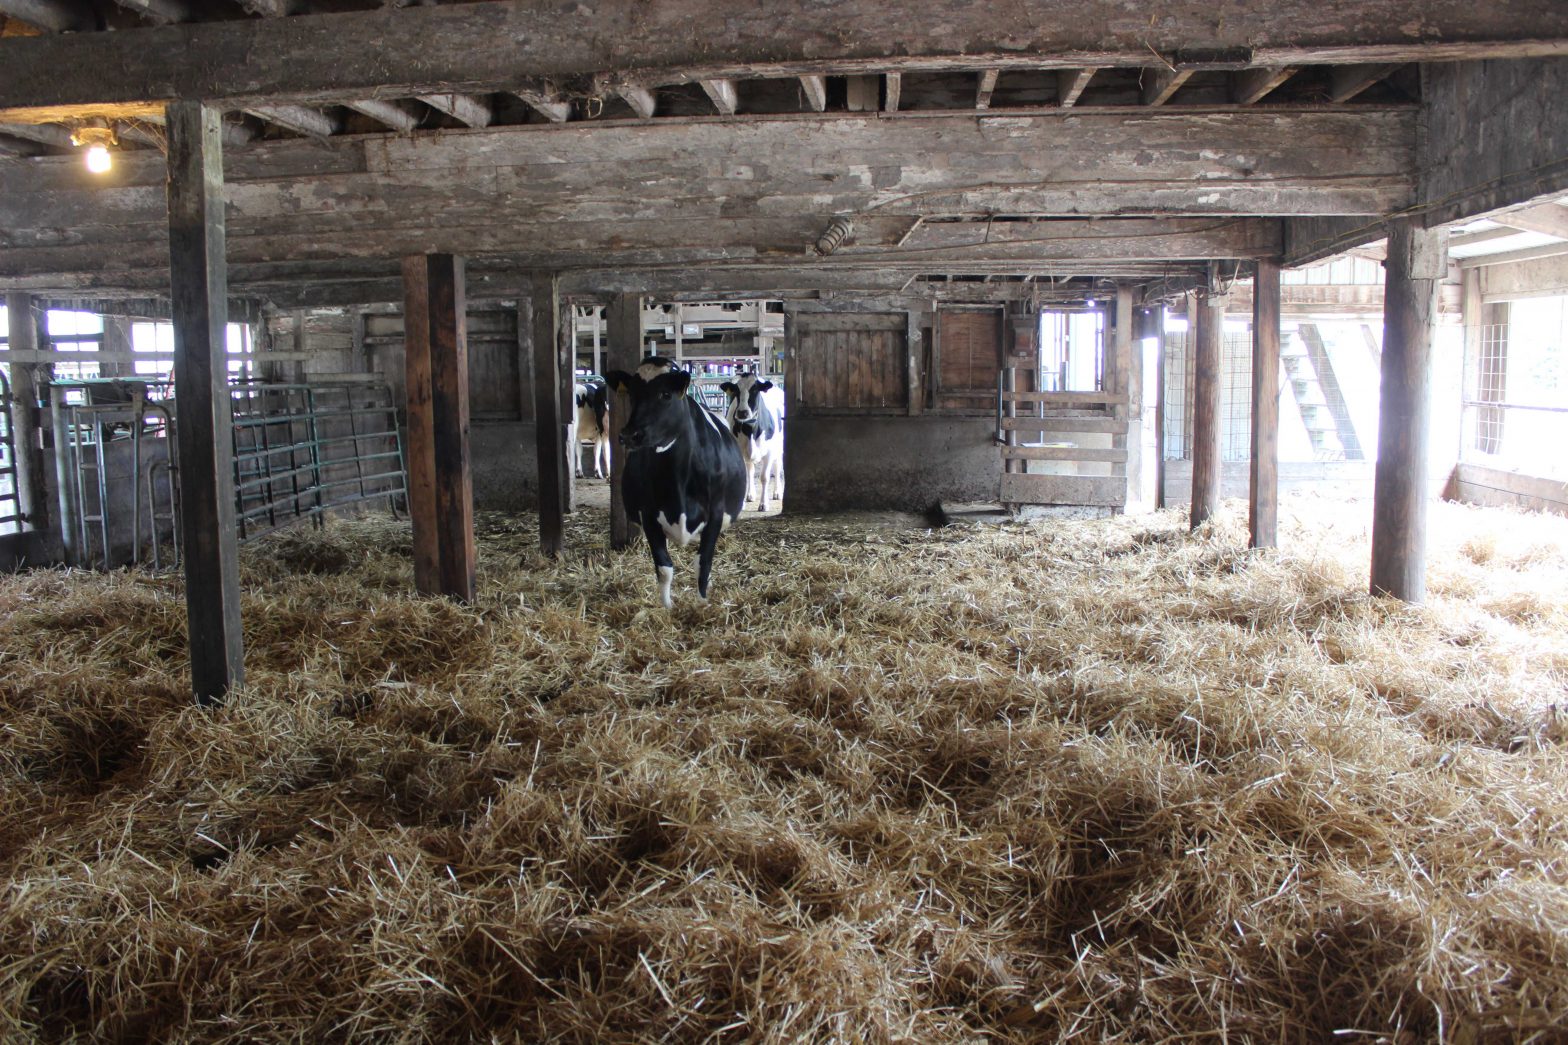 Tom McClellan, owner of McClellan Farms, Inc., turned a stanchion barn into a group calving facility to closely monitor all calving processes.  When the calves are born, they are quickly moved to a smaller pen outside the group pen where they receive a gallon of colostrum and have their navels dipped with a 7-percent tincture iodine solution as soon as possible.  The calves also receive an additional 2 quarts of colostrum at the second feeding to support the immune system and they have their navels dipped a